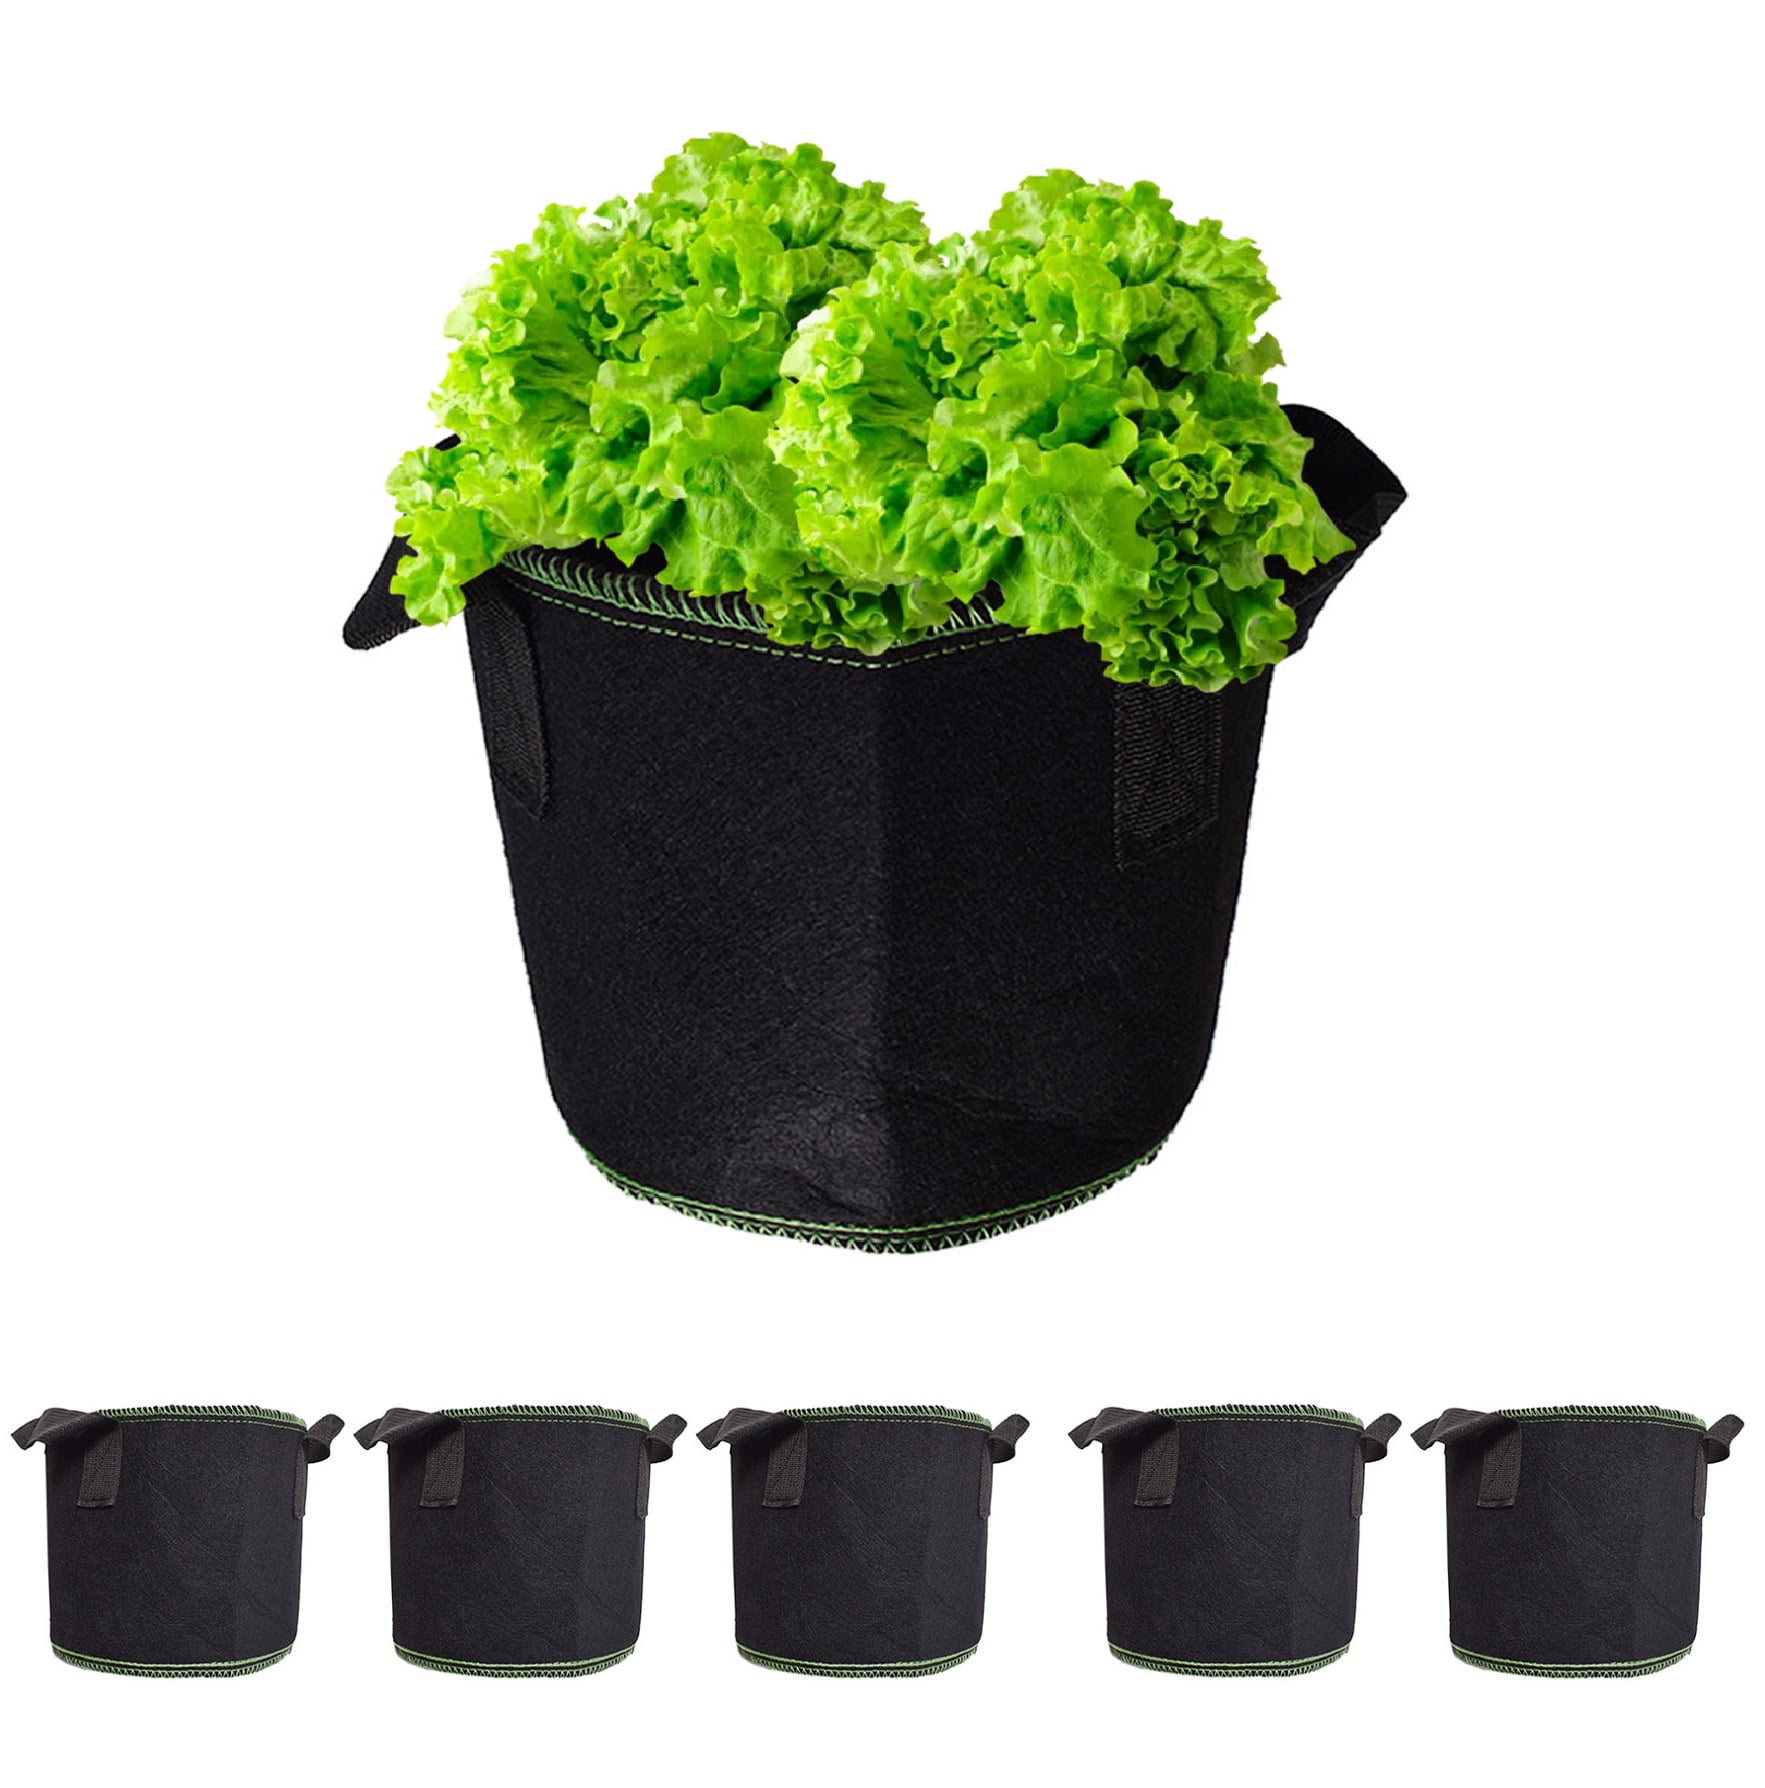 Grow Bags/Aeration Fabric Root Flower Bag Planter Growing Pots W/ Handles 